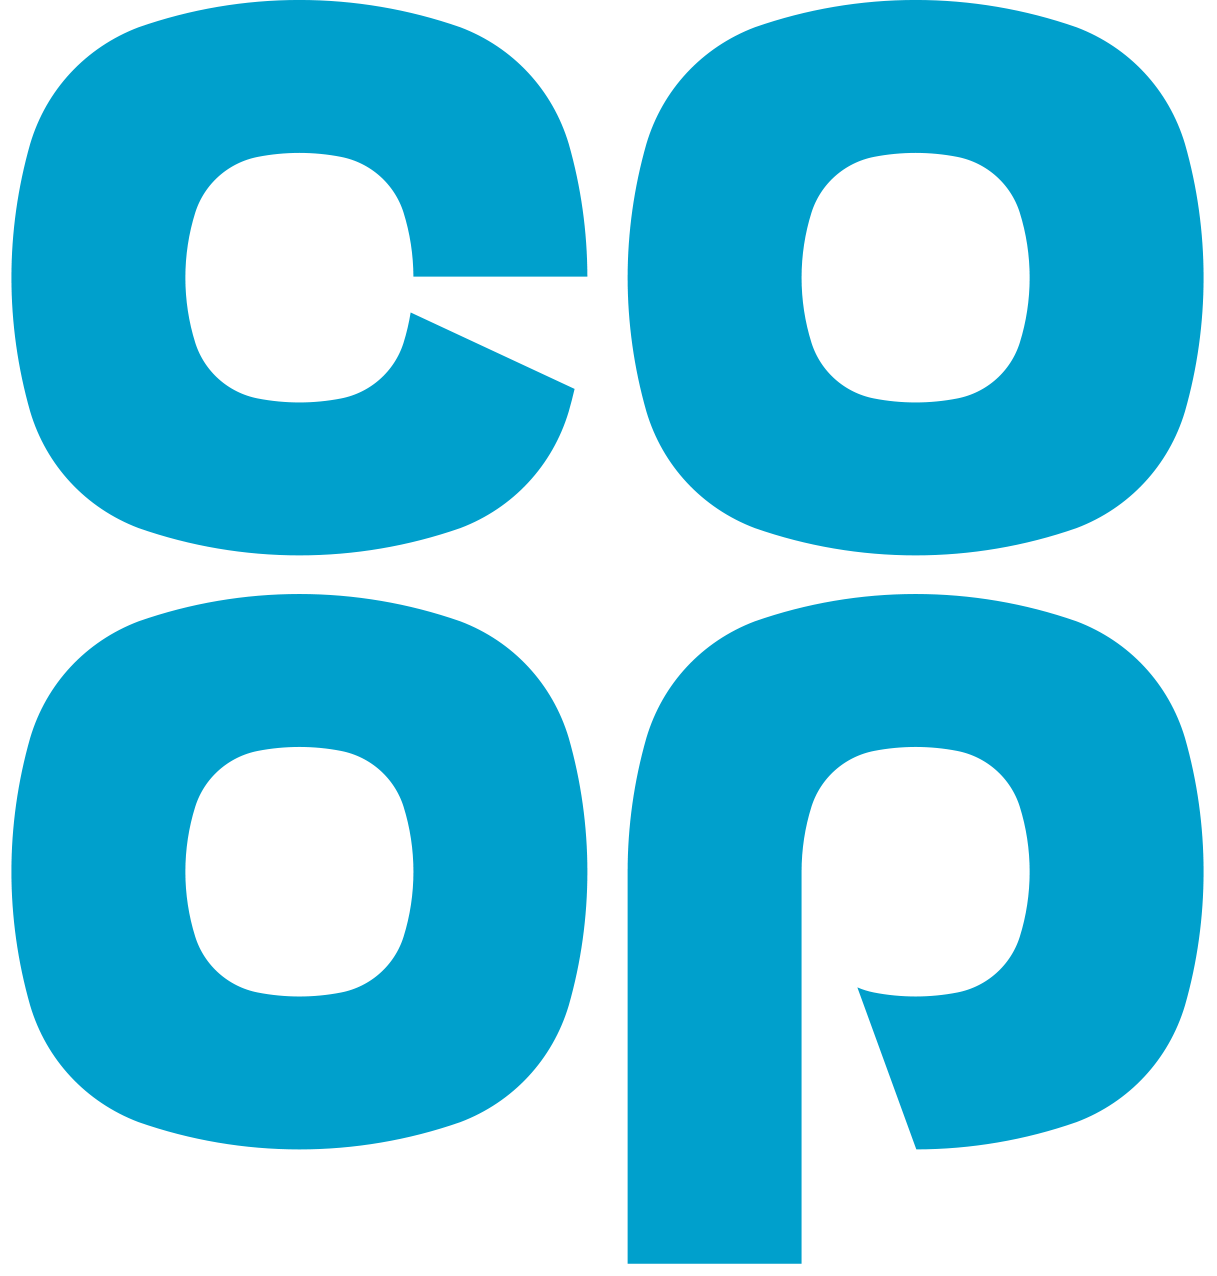 PGM and the Co-op Working Together